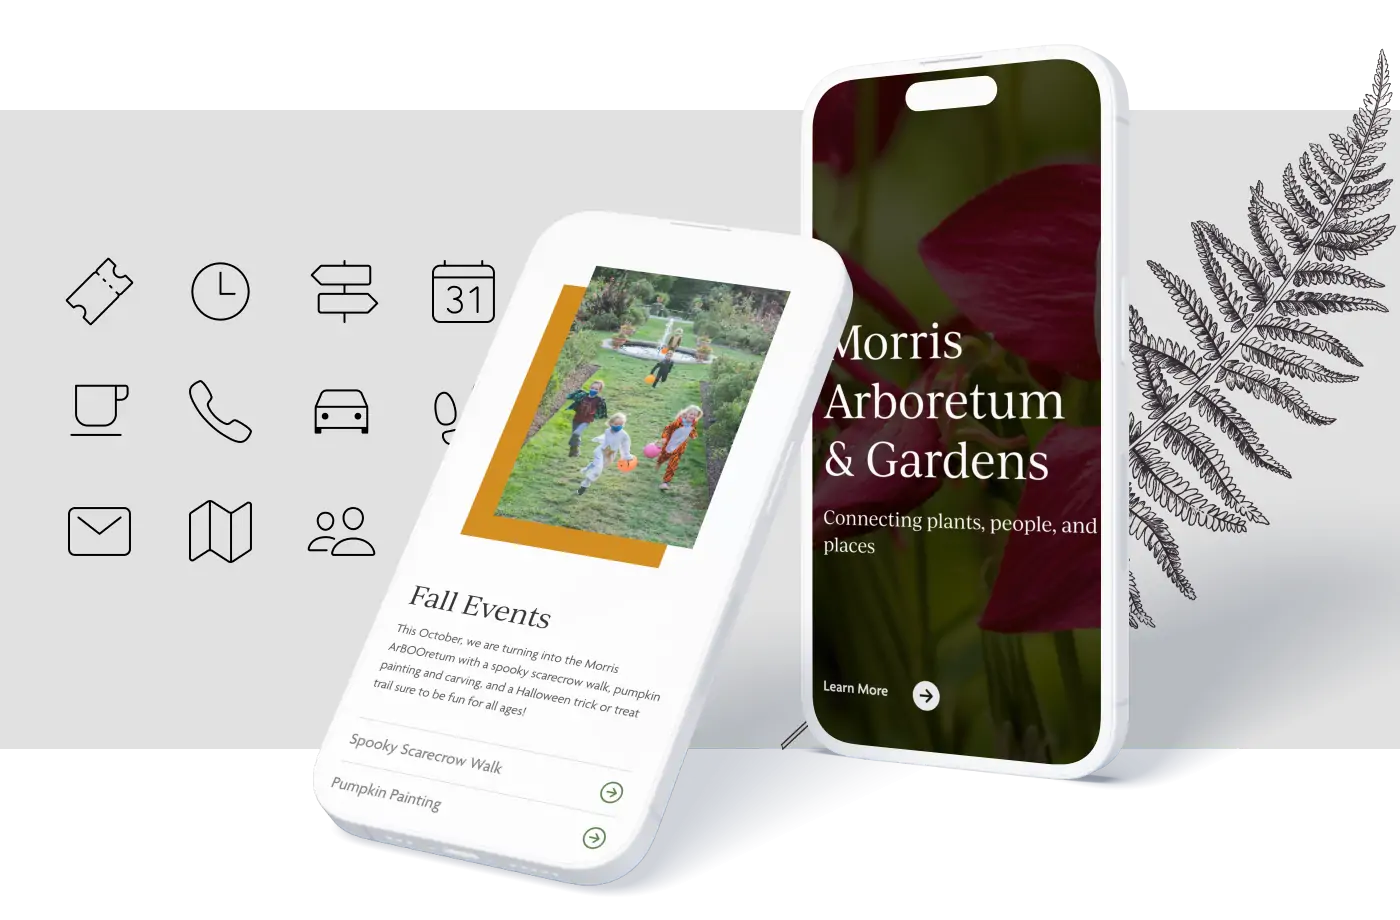 examples of the Morris Arboretum & Gardens website on two different mobile devices with various icons and leaf illustrations behind them